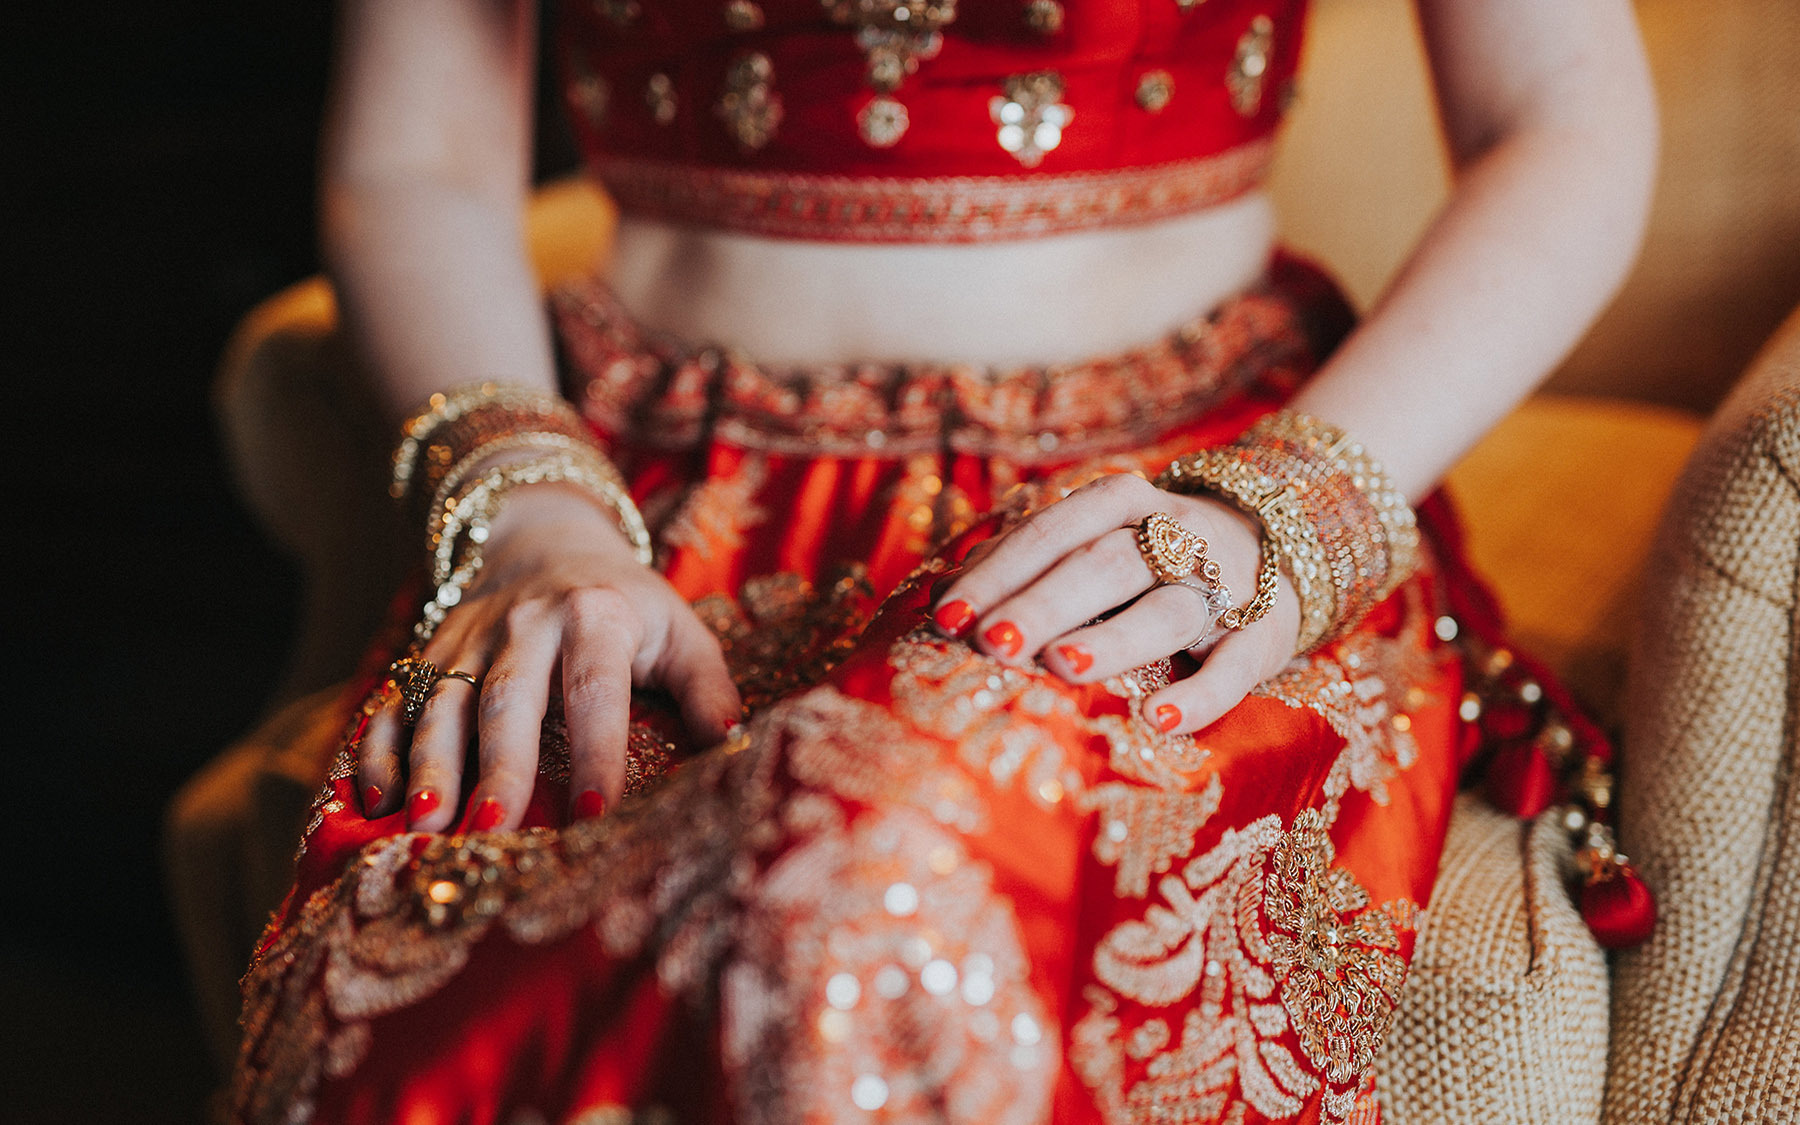 close-up of a woman's waist, arms and lap - dressed in red and gold Indian garb with a bare midrift.